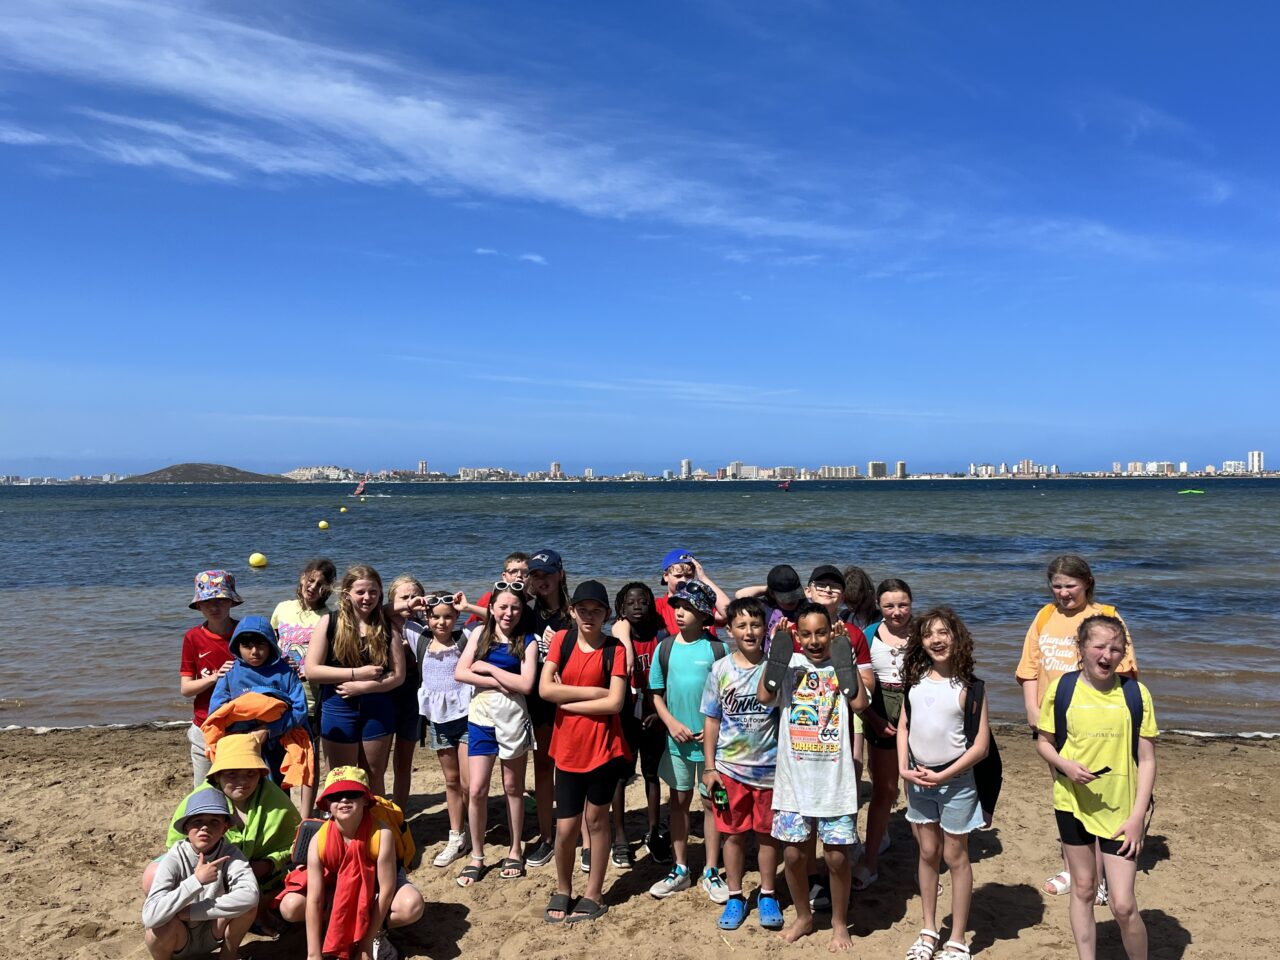 A group of primary school children at the beach on a sunny day. They are standing and kneeling in the sand with the sea visible behind them which leads to a distant landscape of buildings in the background. The sky is blue.